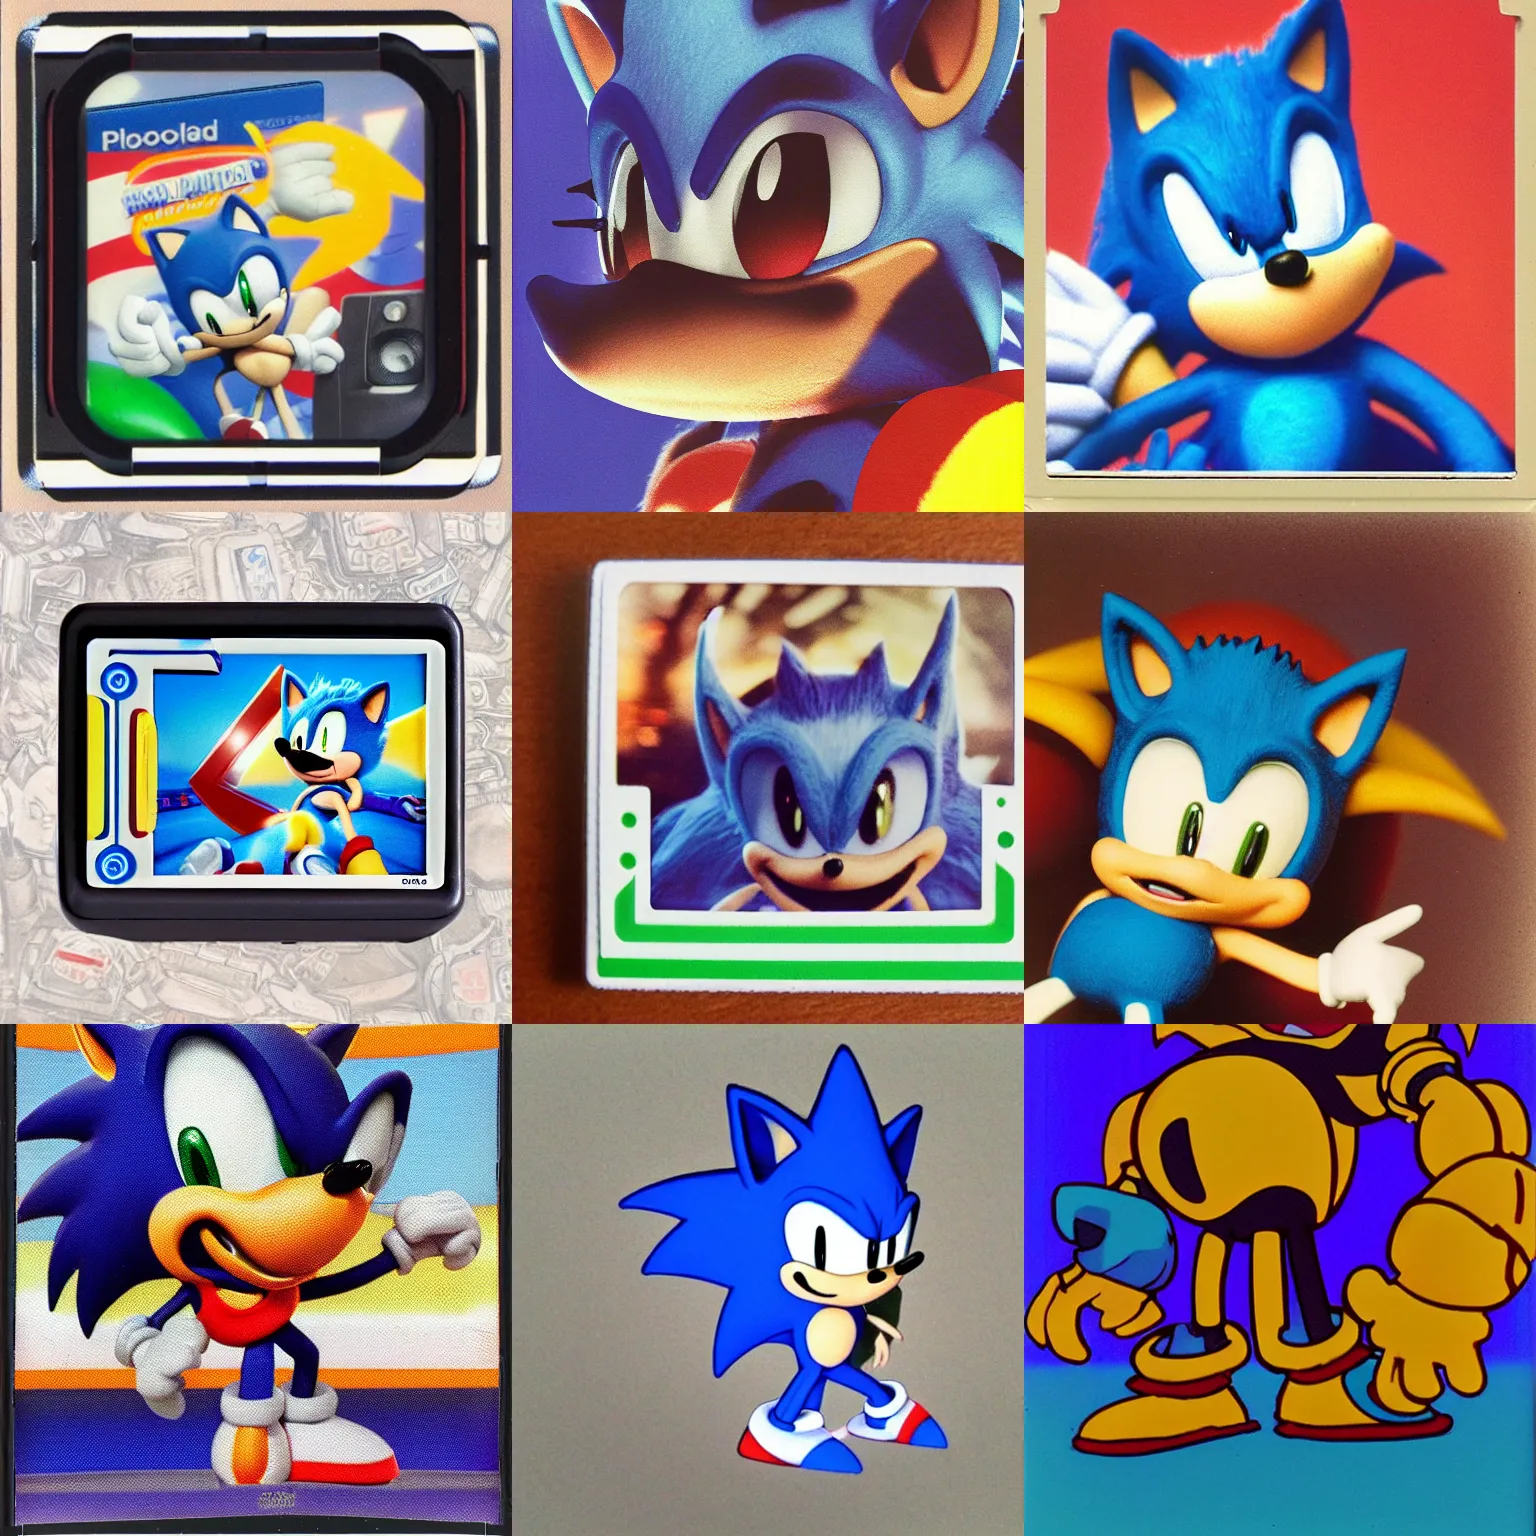 Prompt: polaroid closeup sonic the hedgehog dreaming of puffy portrait colossal claymation scifi matte painting landscape of a surreal acid, sonic the hedgehog retro moulded domineering craven chubby soggy roomy noxious fluttering checkerboard background 1 9 8 0 s 1 9 8 2 sega genesis video game album cover